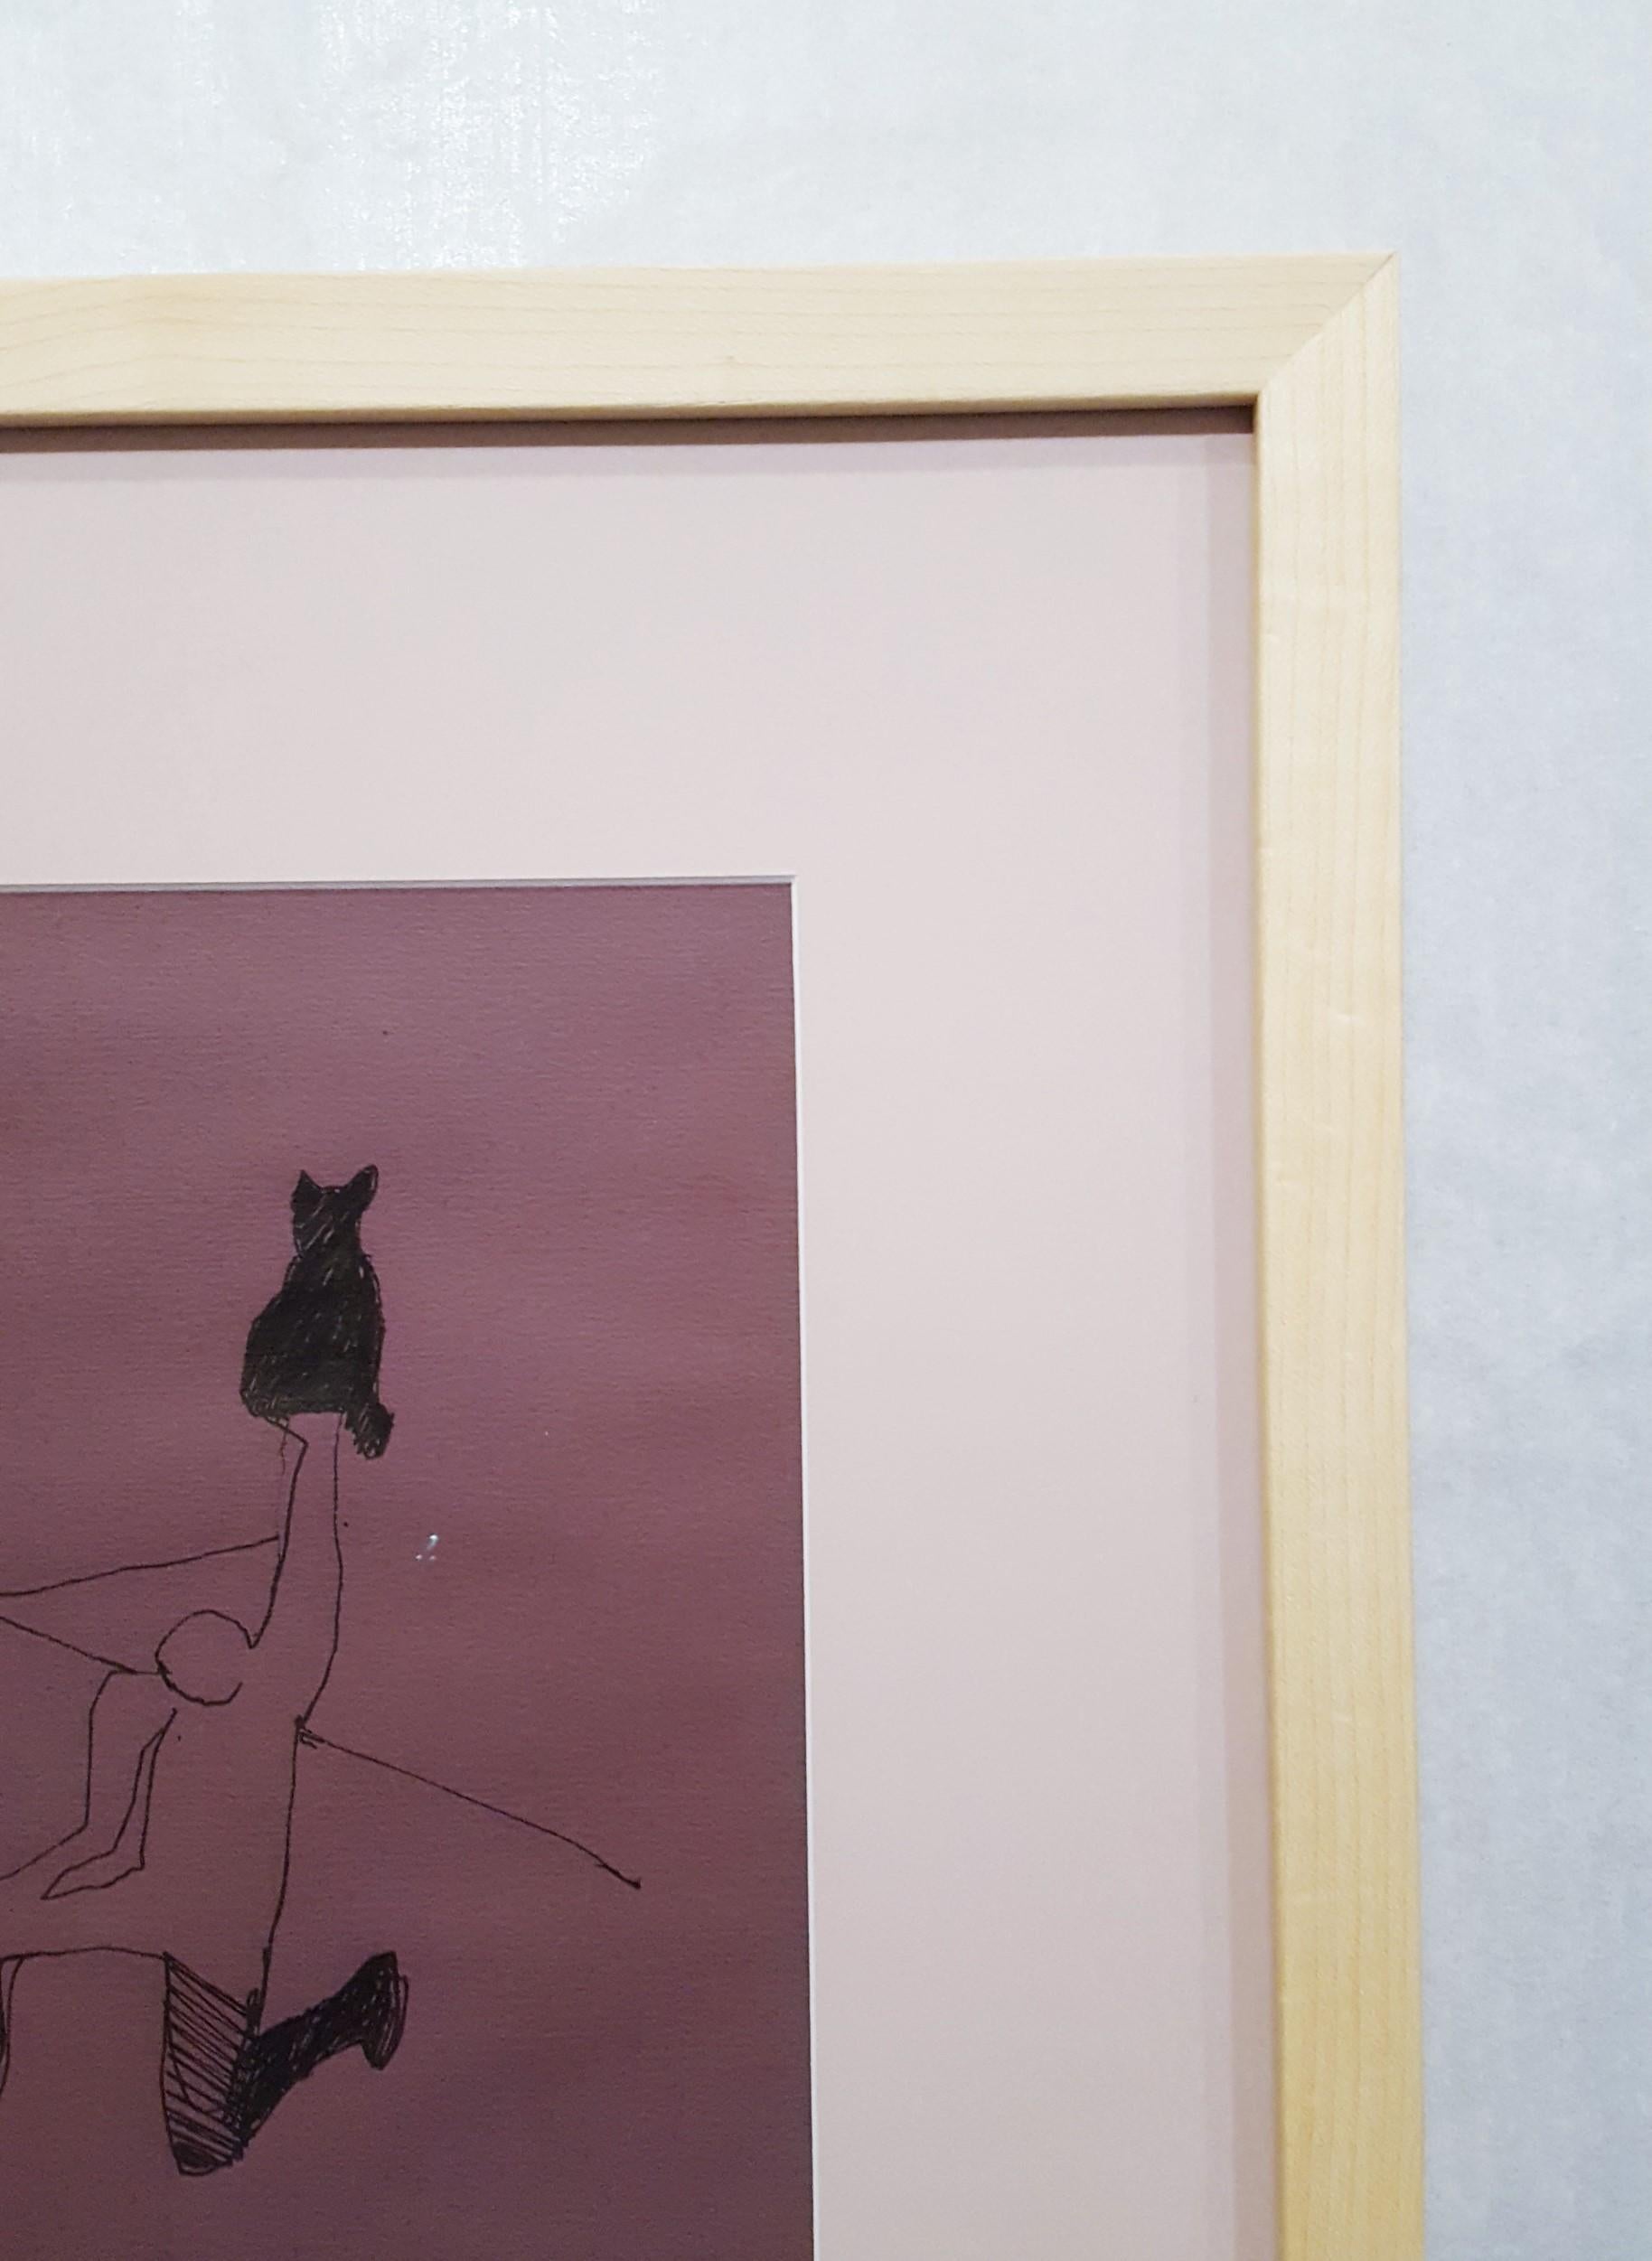 An original pen and ink drawing on purple wove paper by Native American artist Fritz Scholder (1937-2005) titled 